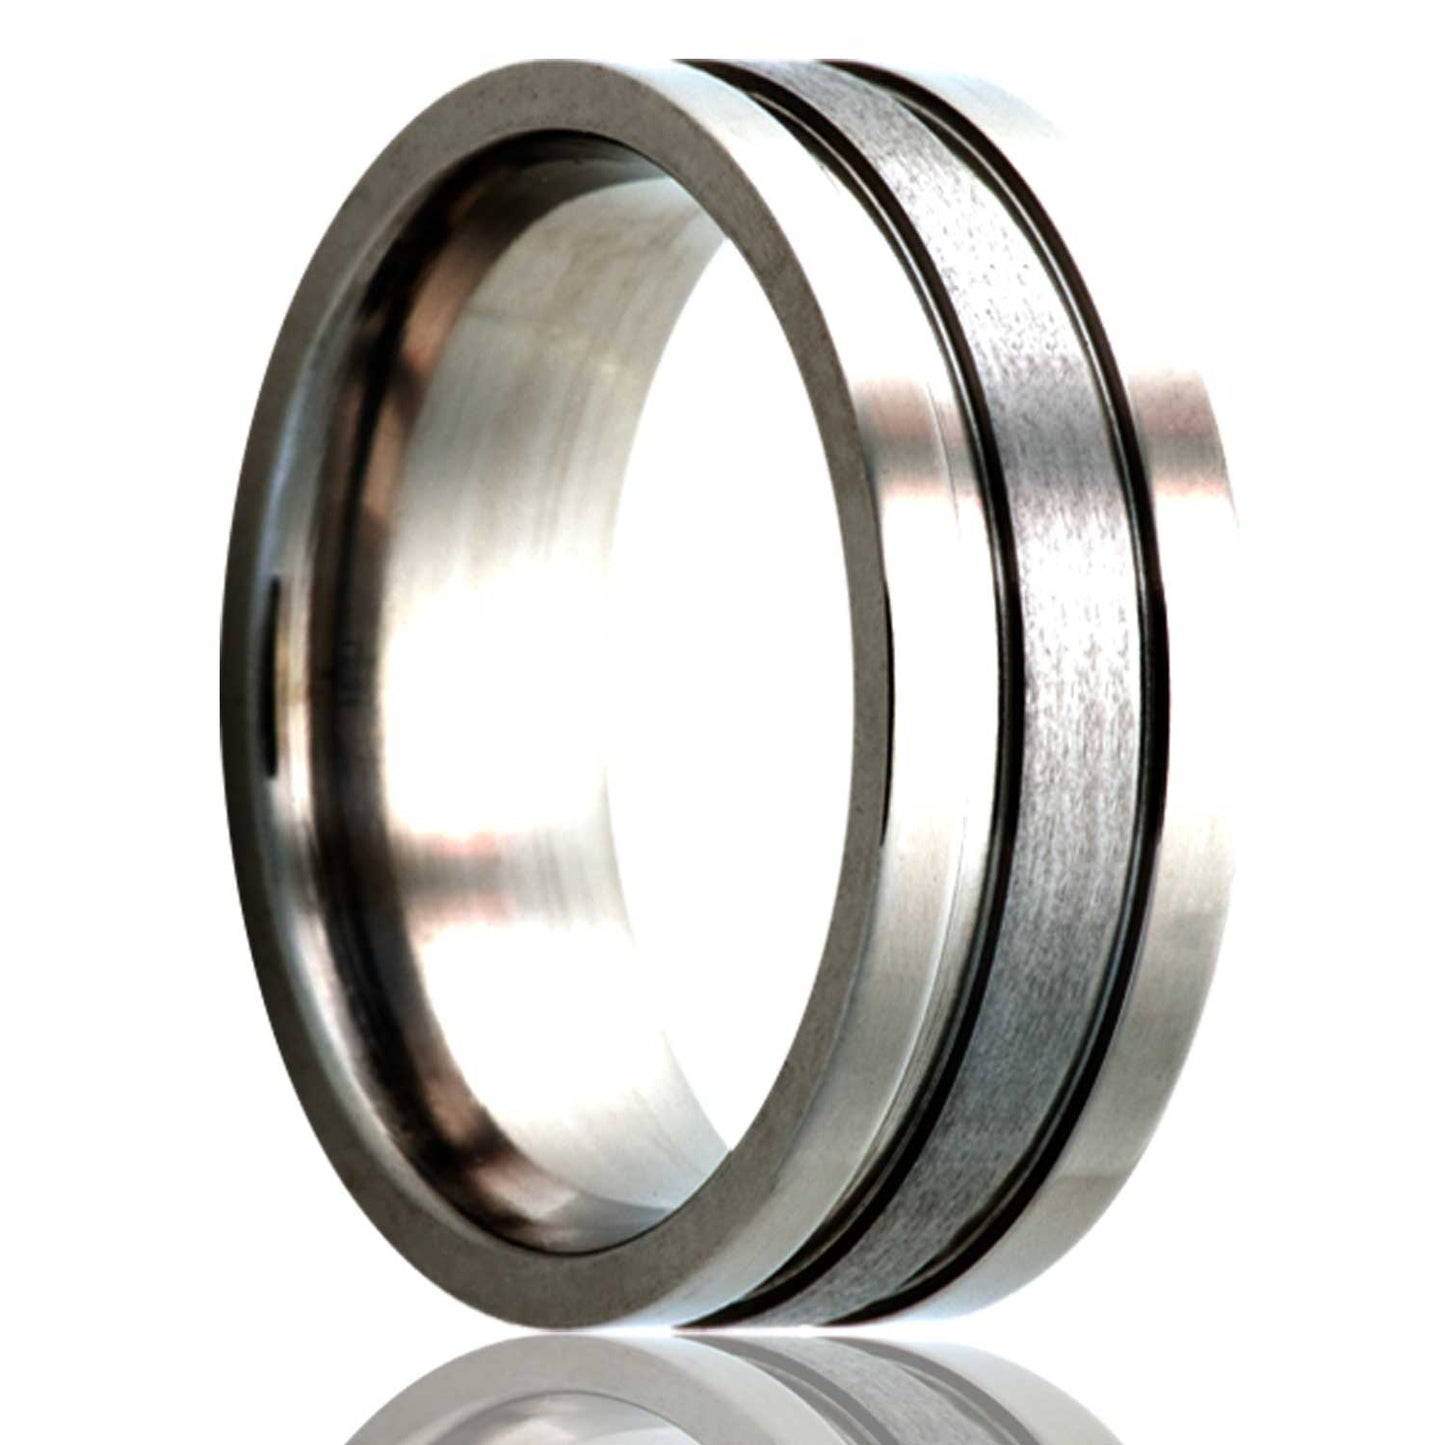 A satin finish grooved titanium wedding band displayed on a neutral white background.